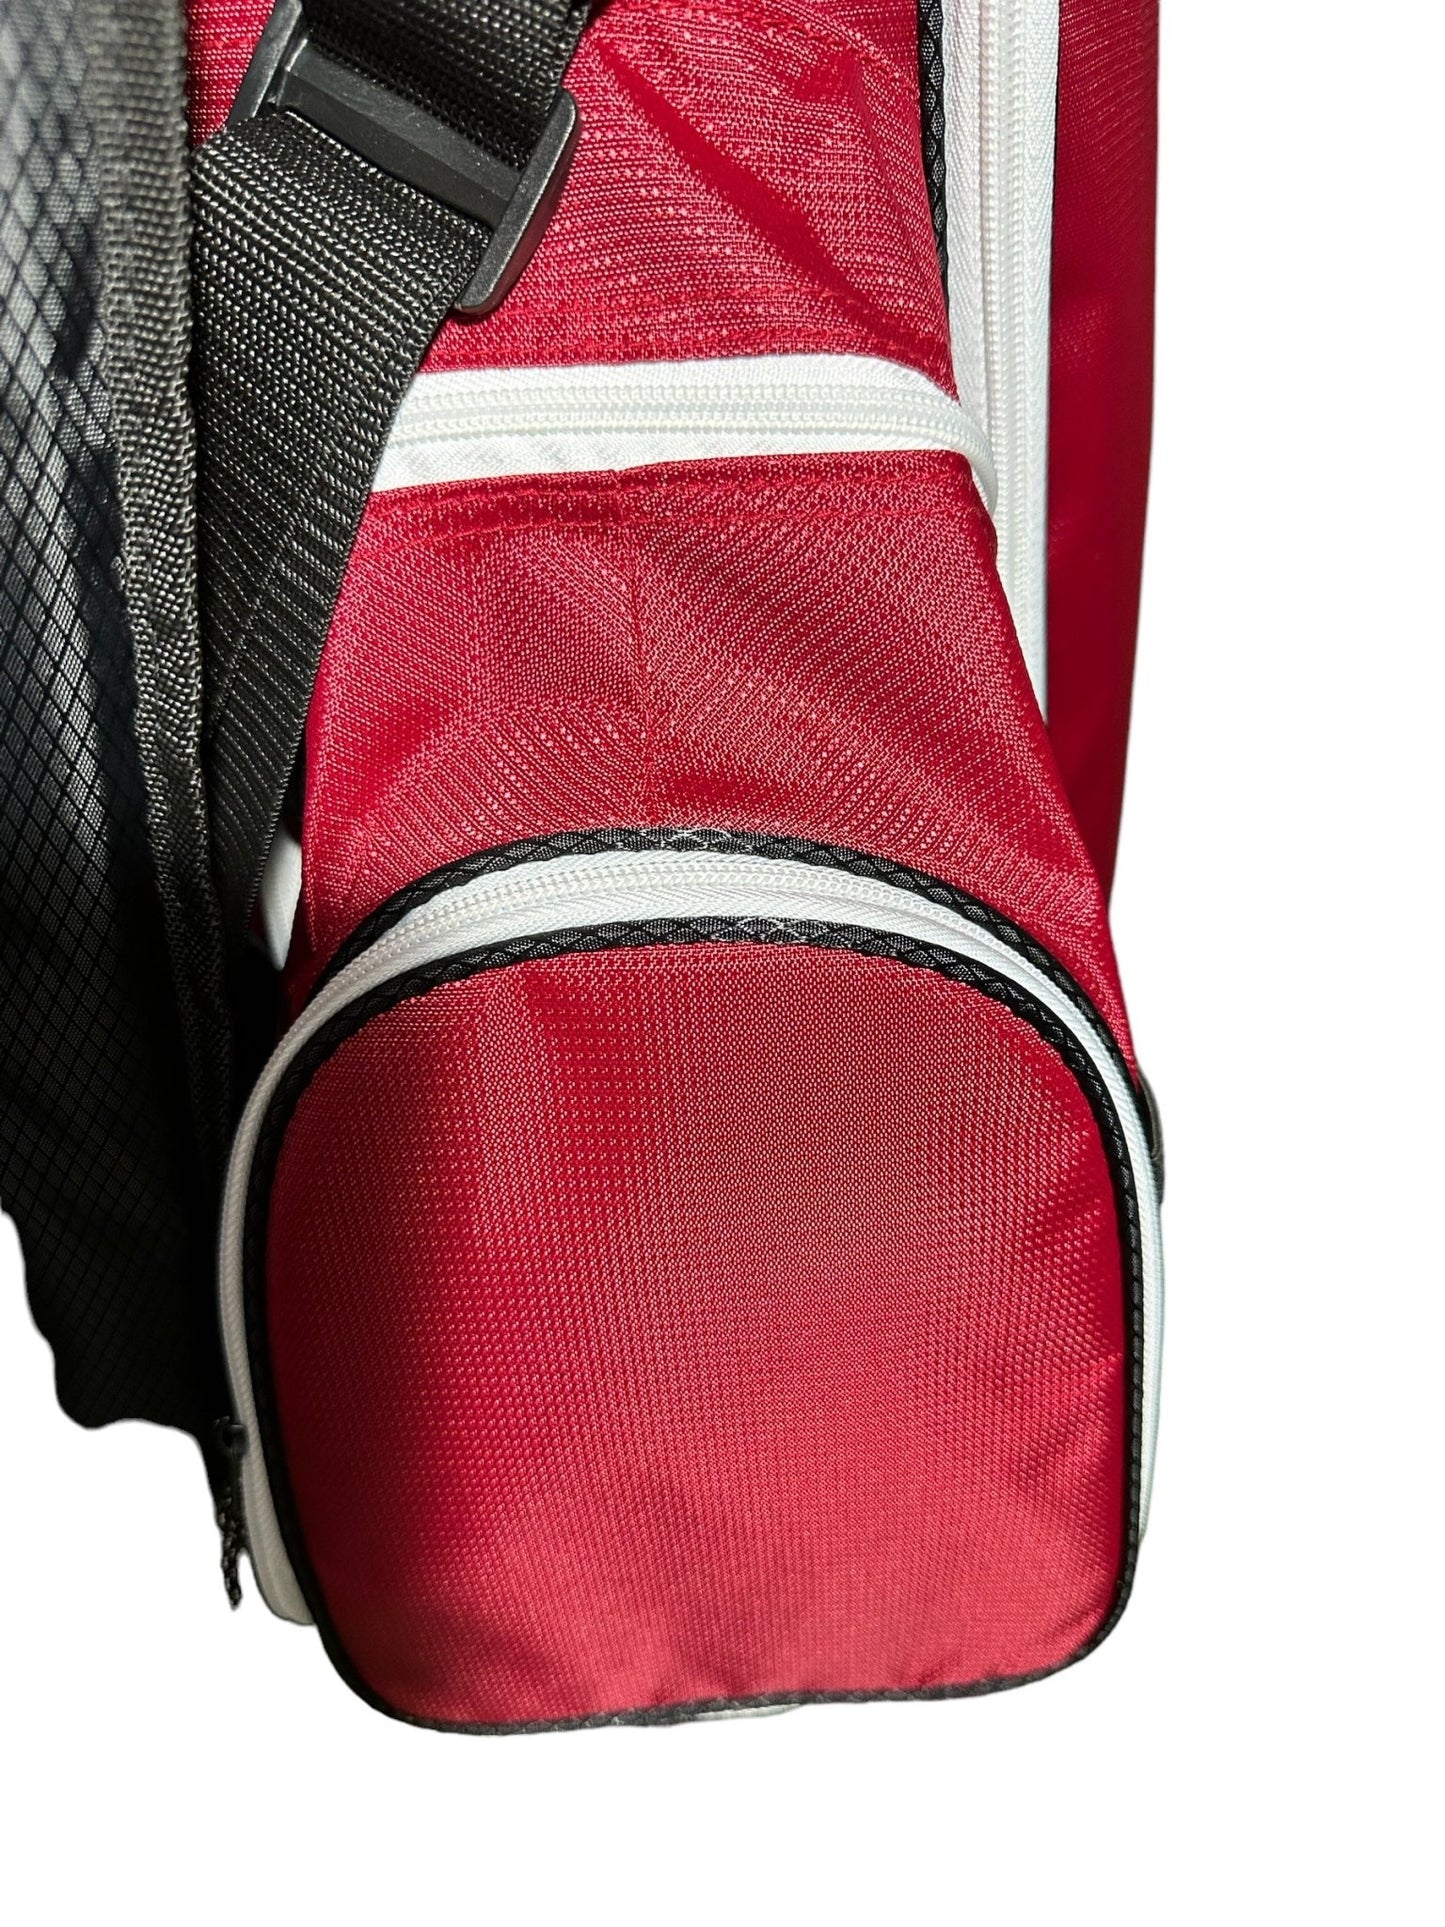 (New) Wilson Cart Red Golf Bag, Stunning Bag With Rain Cover - Golf Store UK